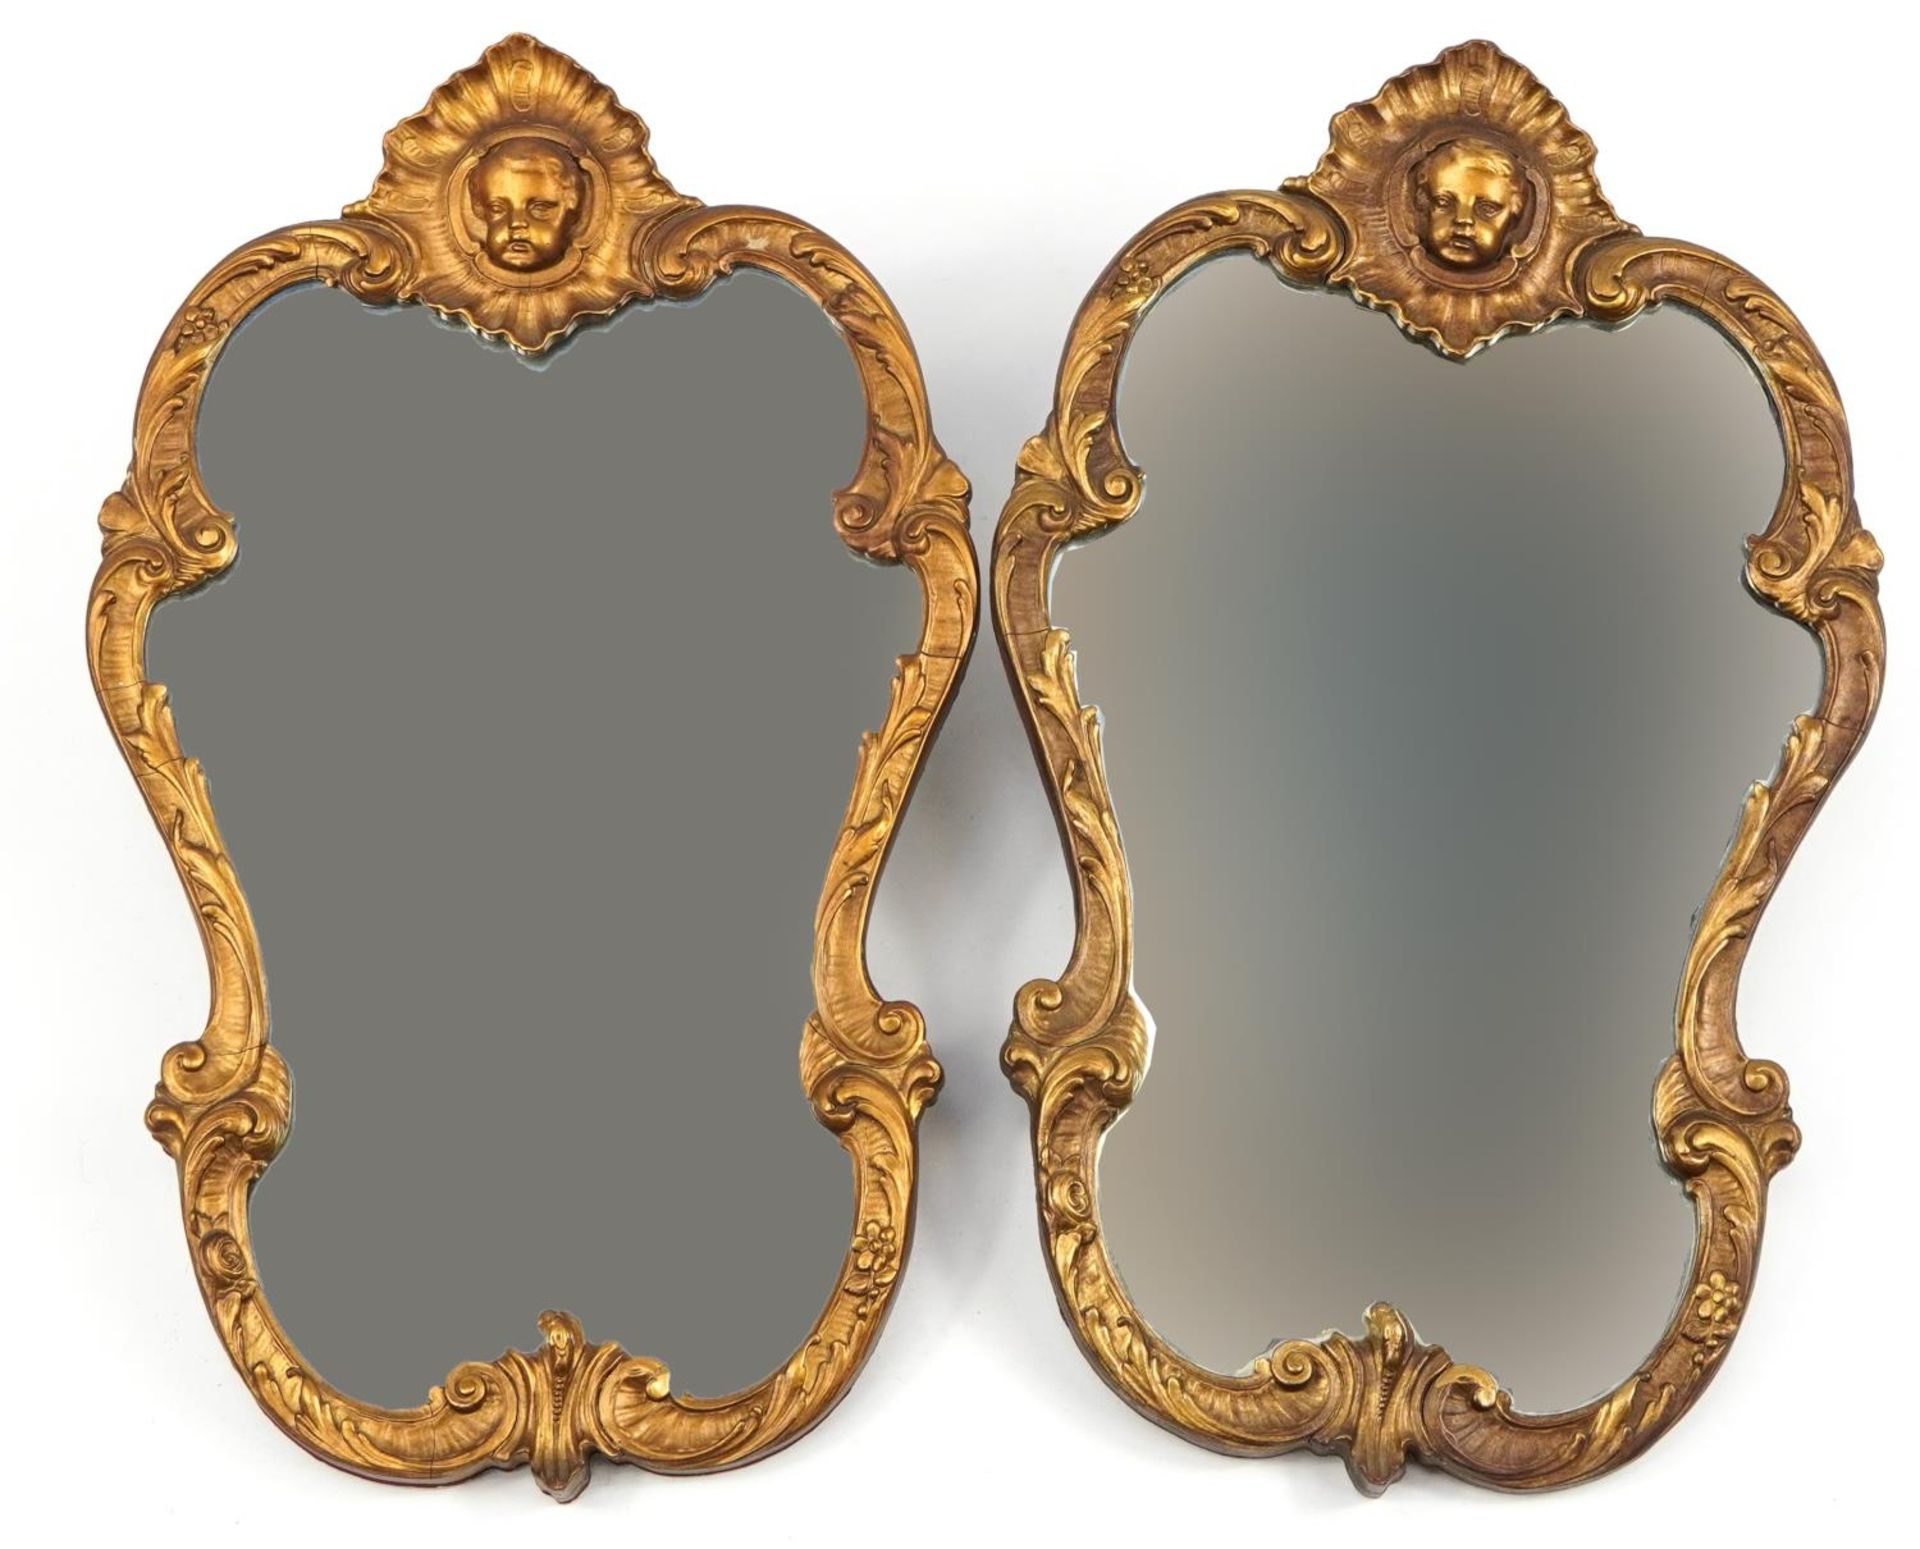 Pair of gilt framed cartouche wall mirrors with acanthus design borders, each 56cm high